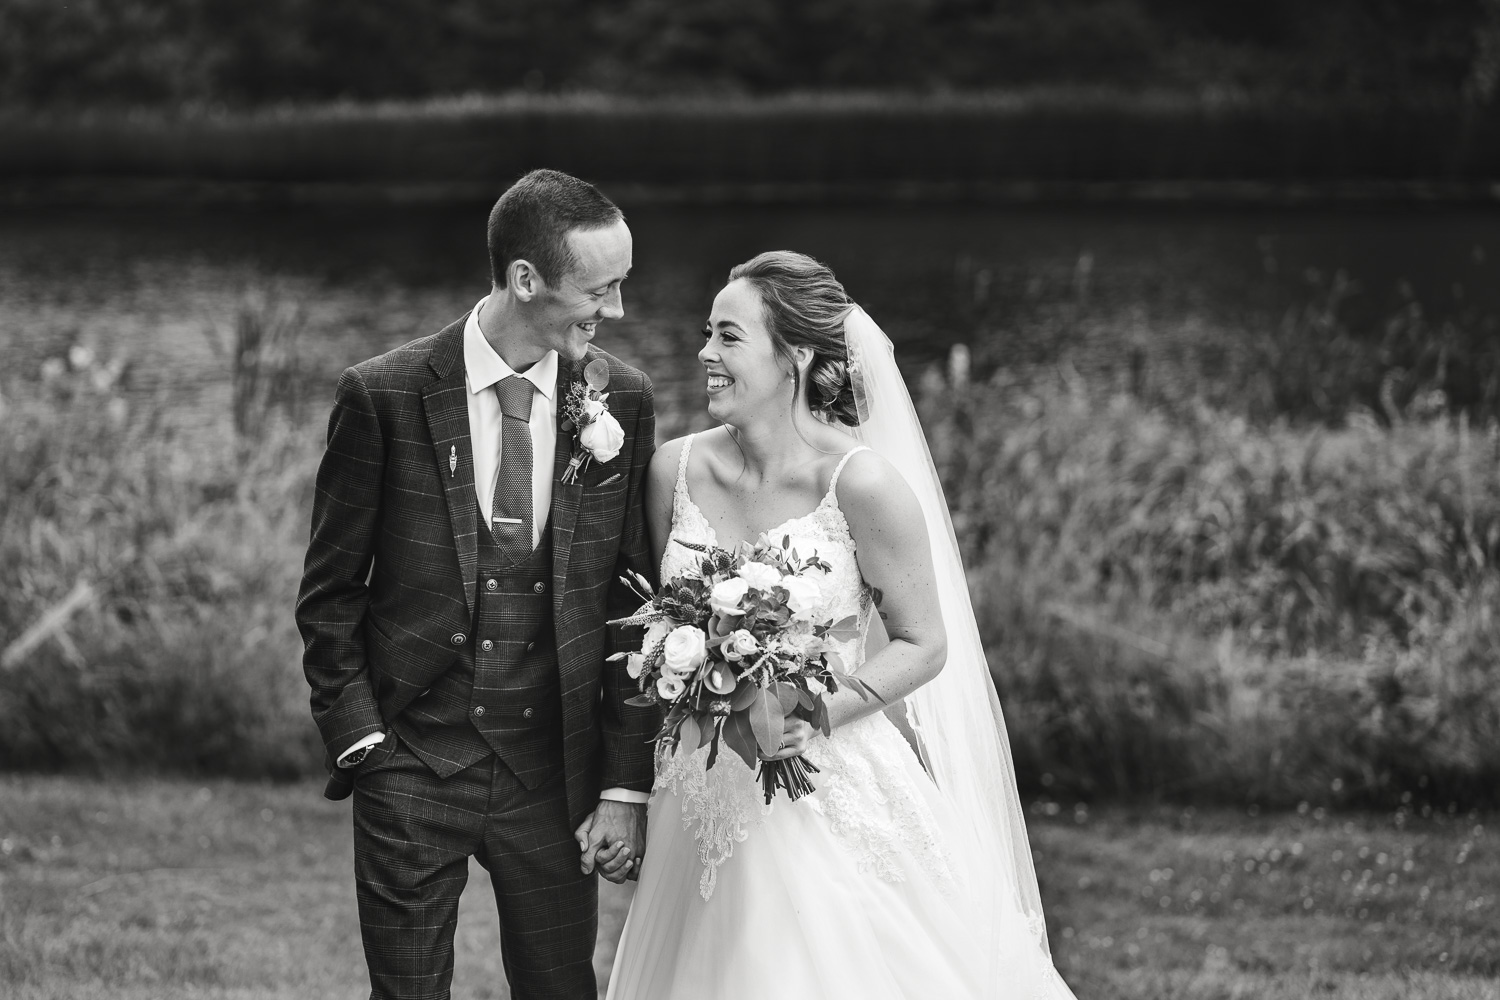 Bride and Groom laughing together in the grounds of Knowsley Hall